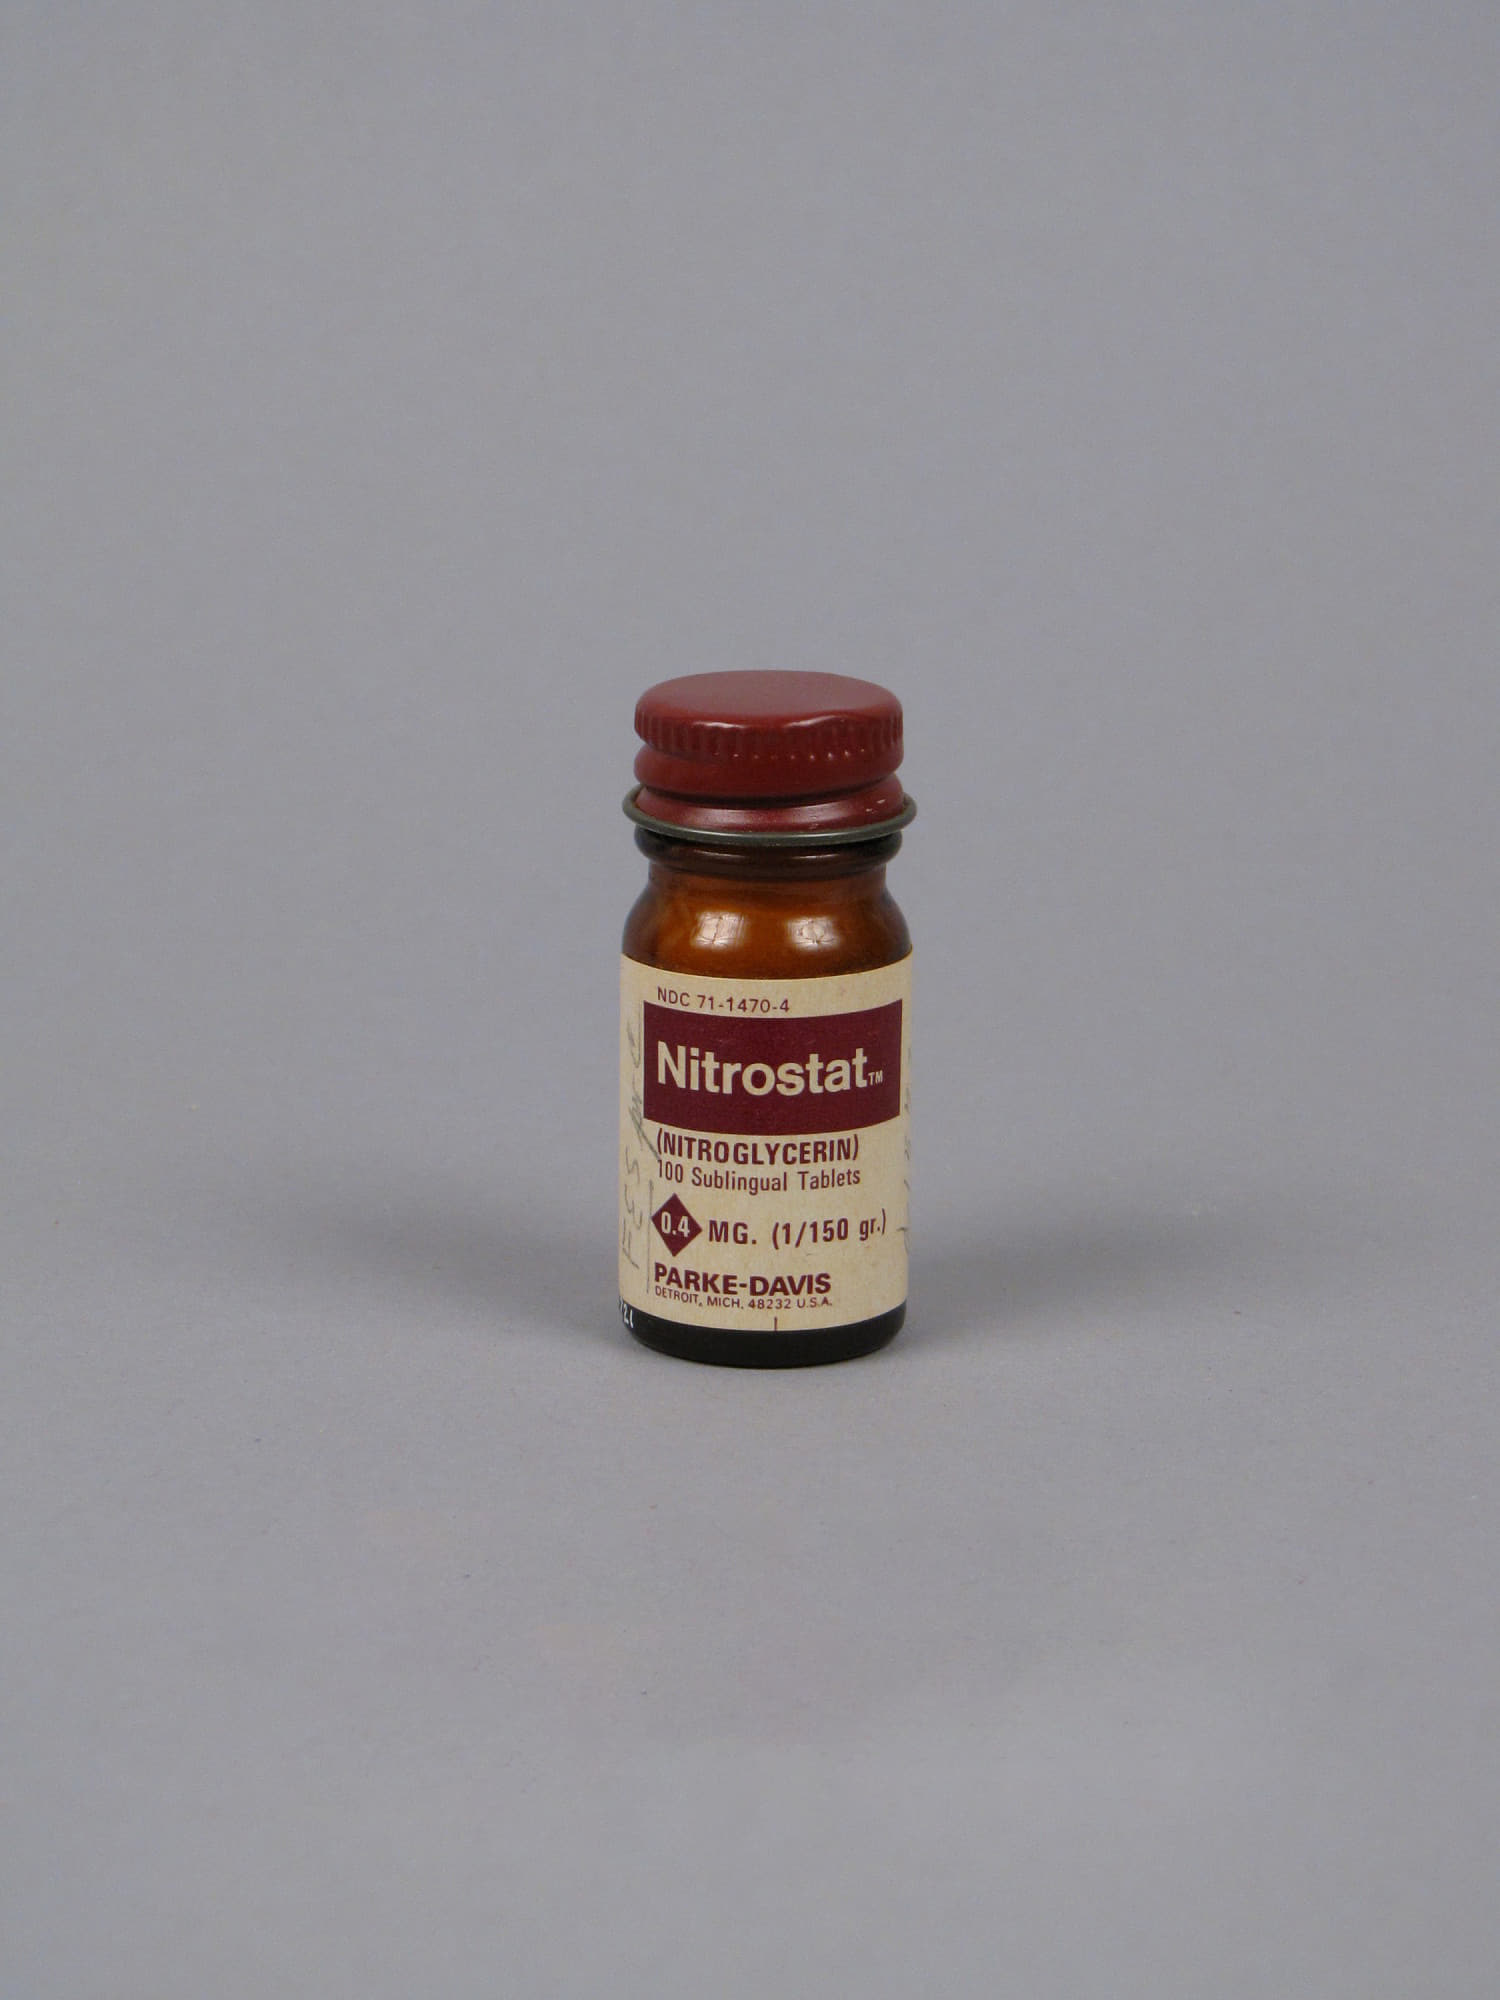 Nitrostat is a nitrate that dilates blood vessels, making it easier for blood to flow through them and easier for the heart to pump. Courtesy: National Museum of American History.